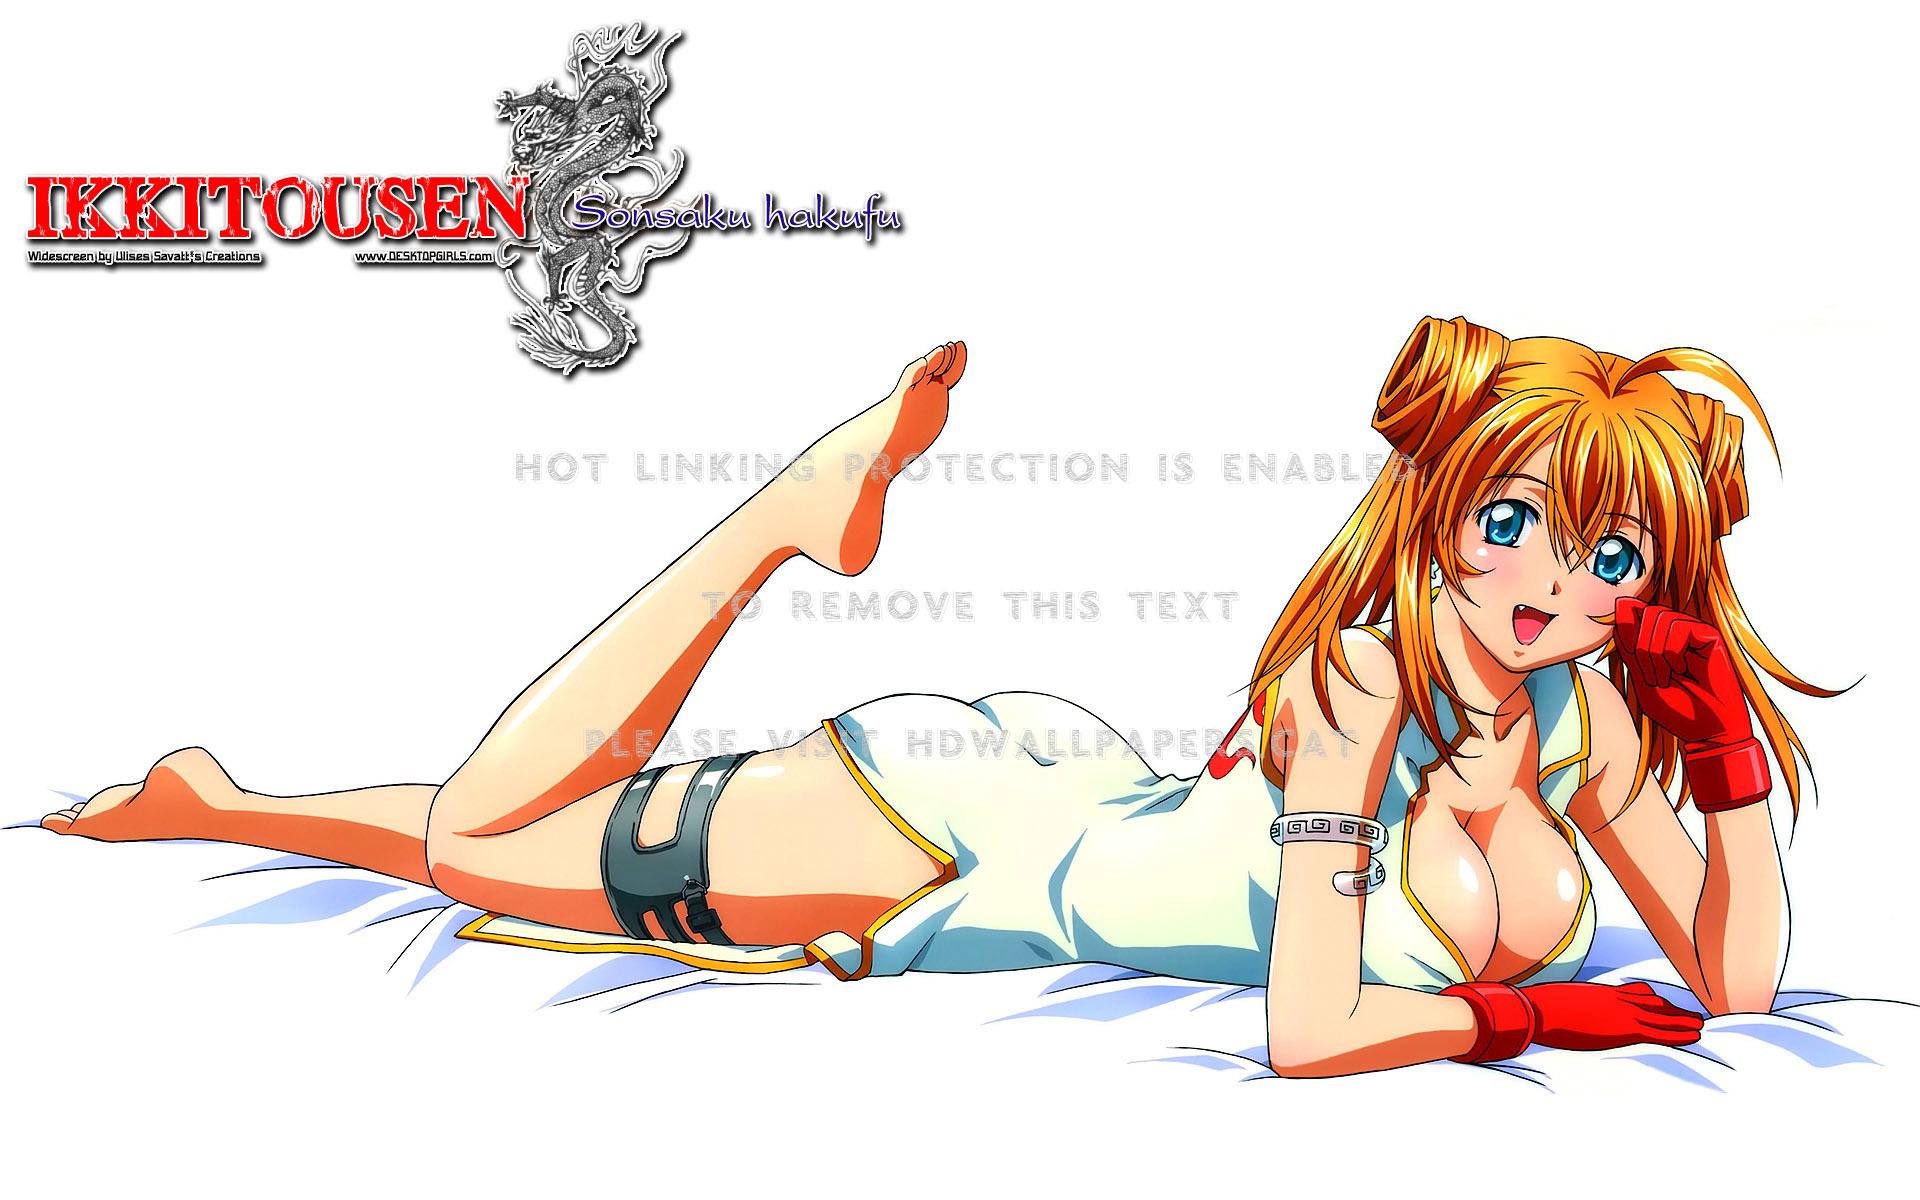 30 Hot Pictures Of Hakufu From The Anime Ikkitousen Will Bring Big Grin On Your Face | Best Of Comic Books